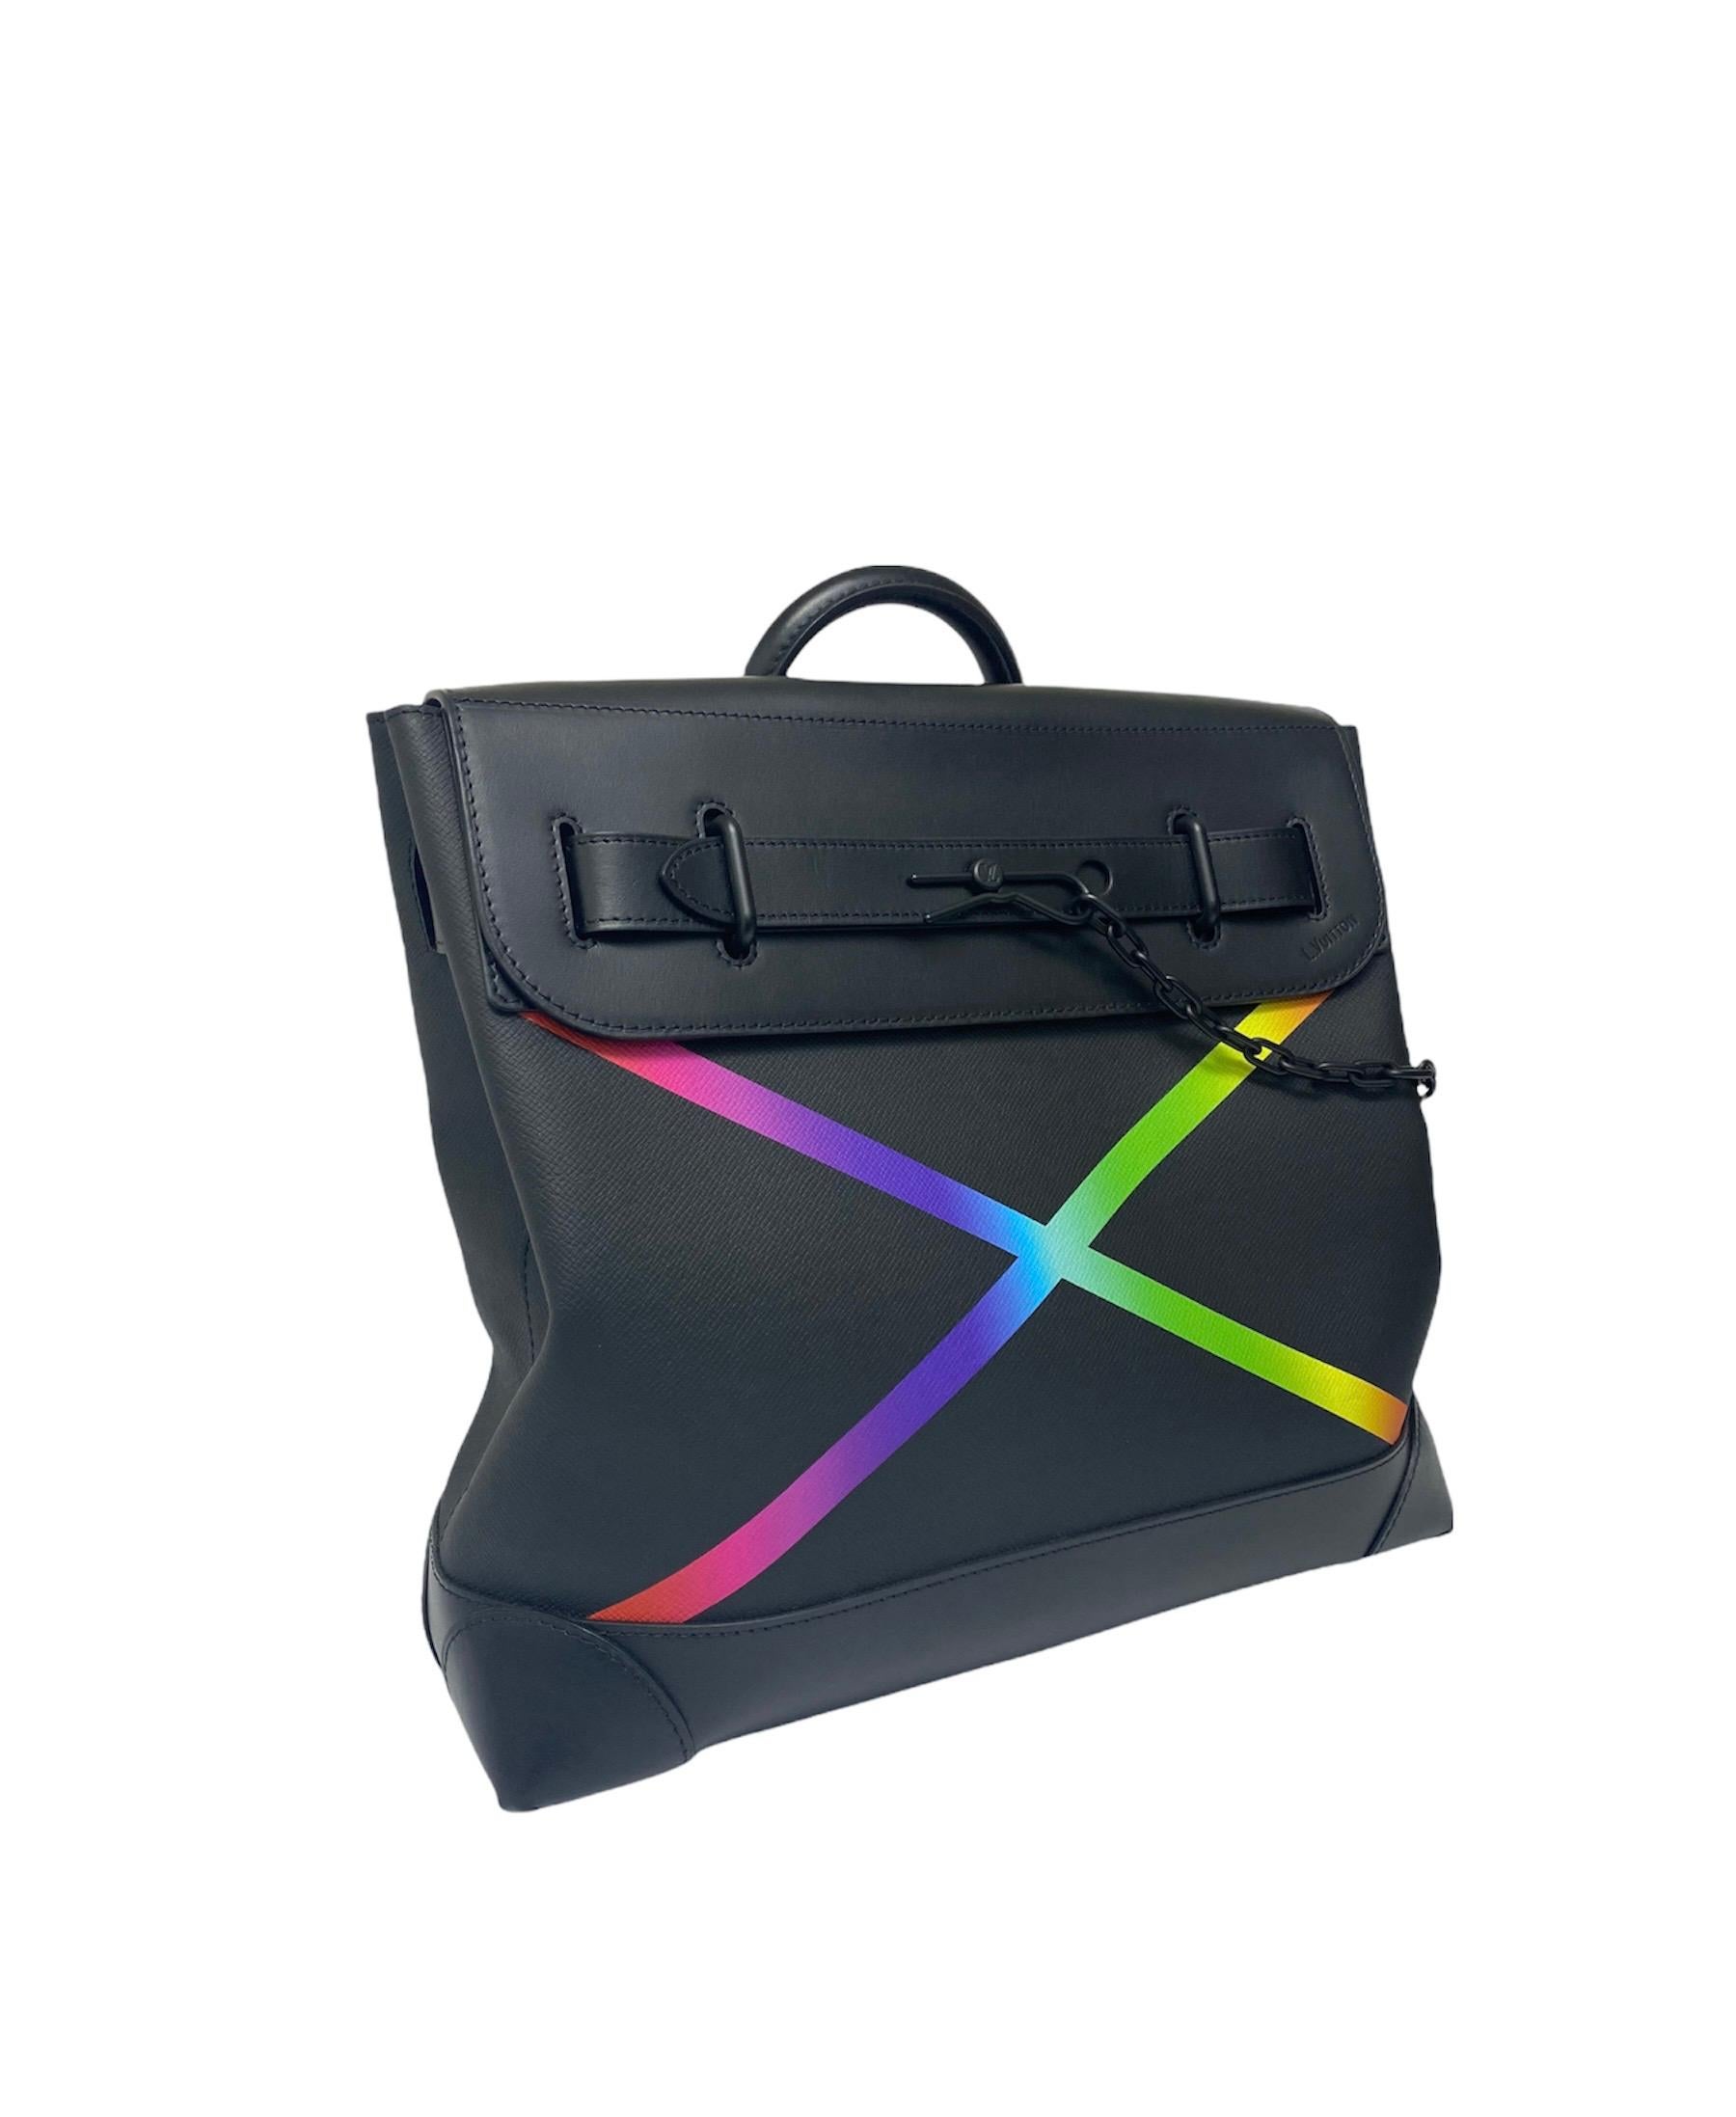 Louis Vuitton Limited Edition Taiga Rainbow x Virgil Abloh bag in black leather with black hardware.The bag is equipped with a front flap with interlocking strap closure with chain.The interiors are lined with a black fabric, and has three internal